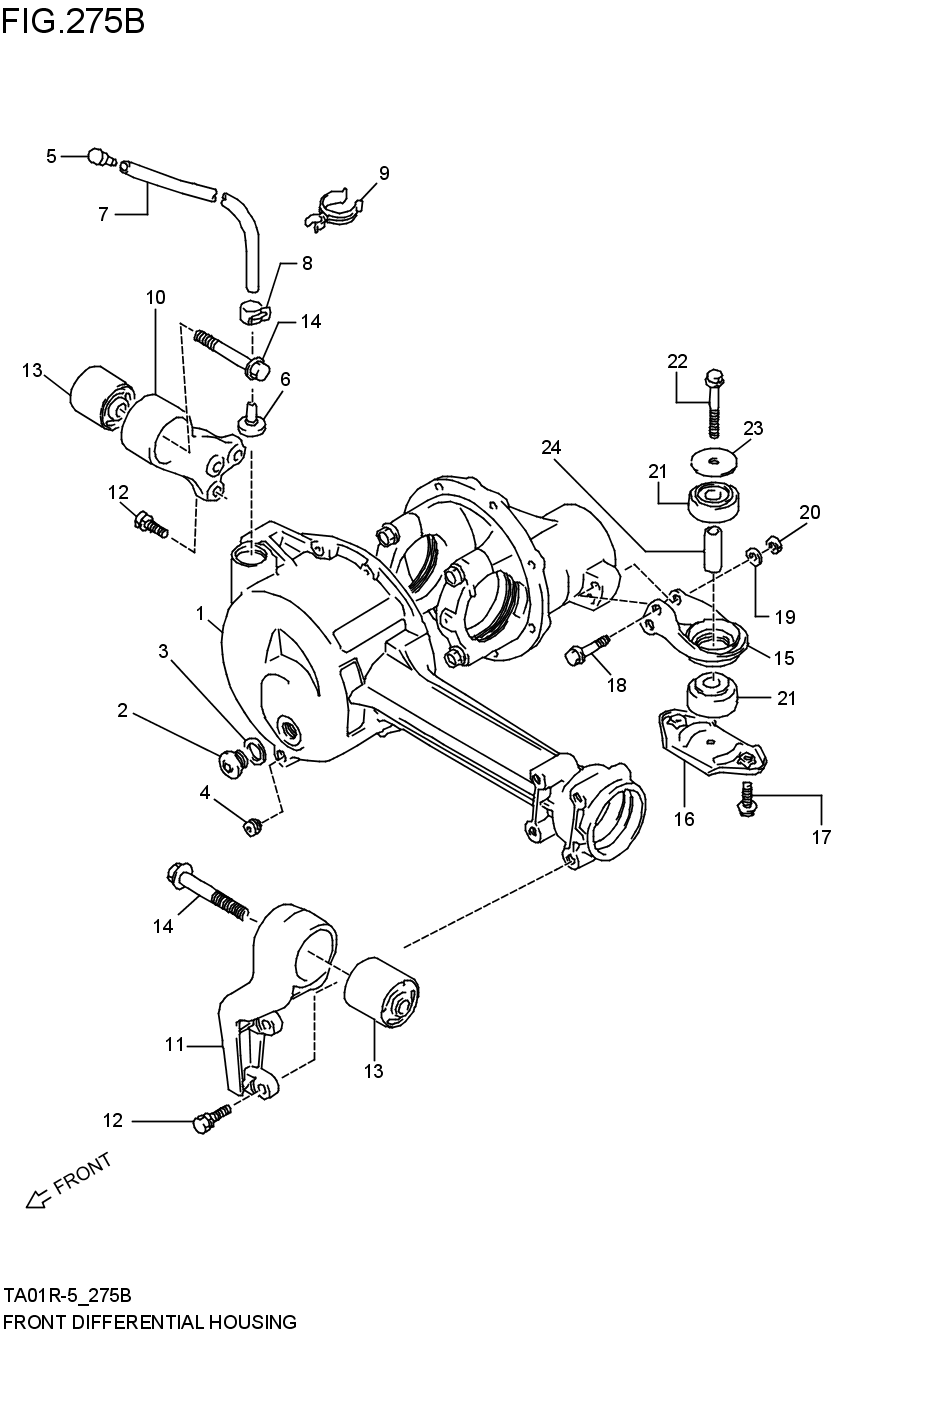 FRONT DIFFERENTIAL HOUSING